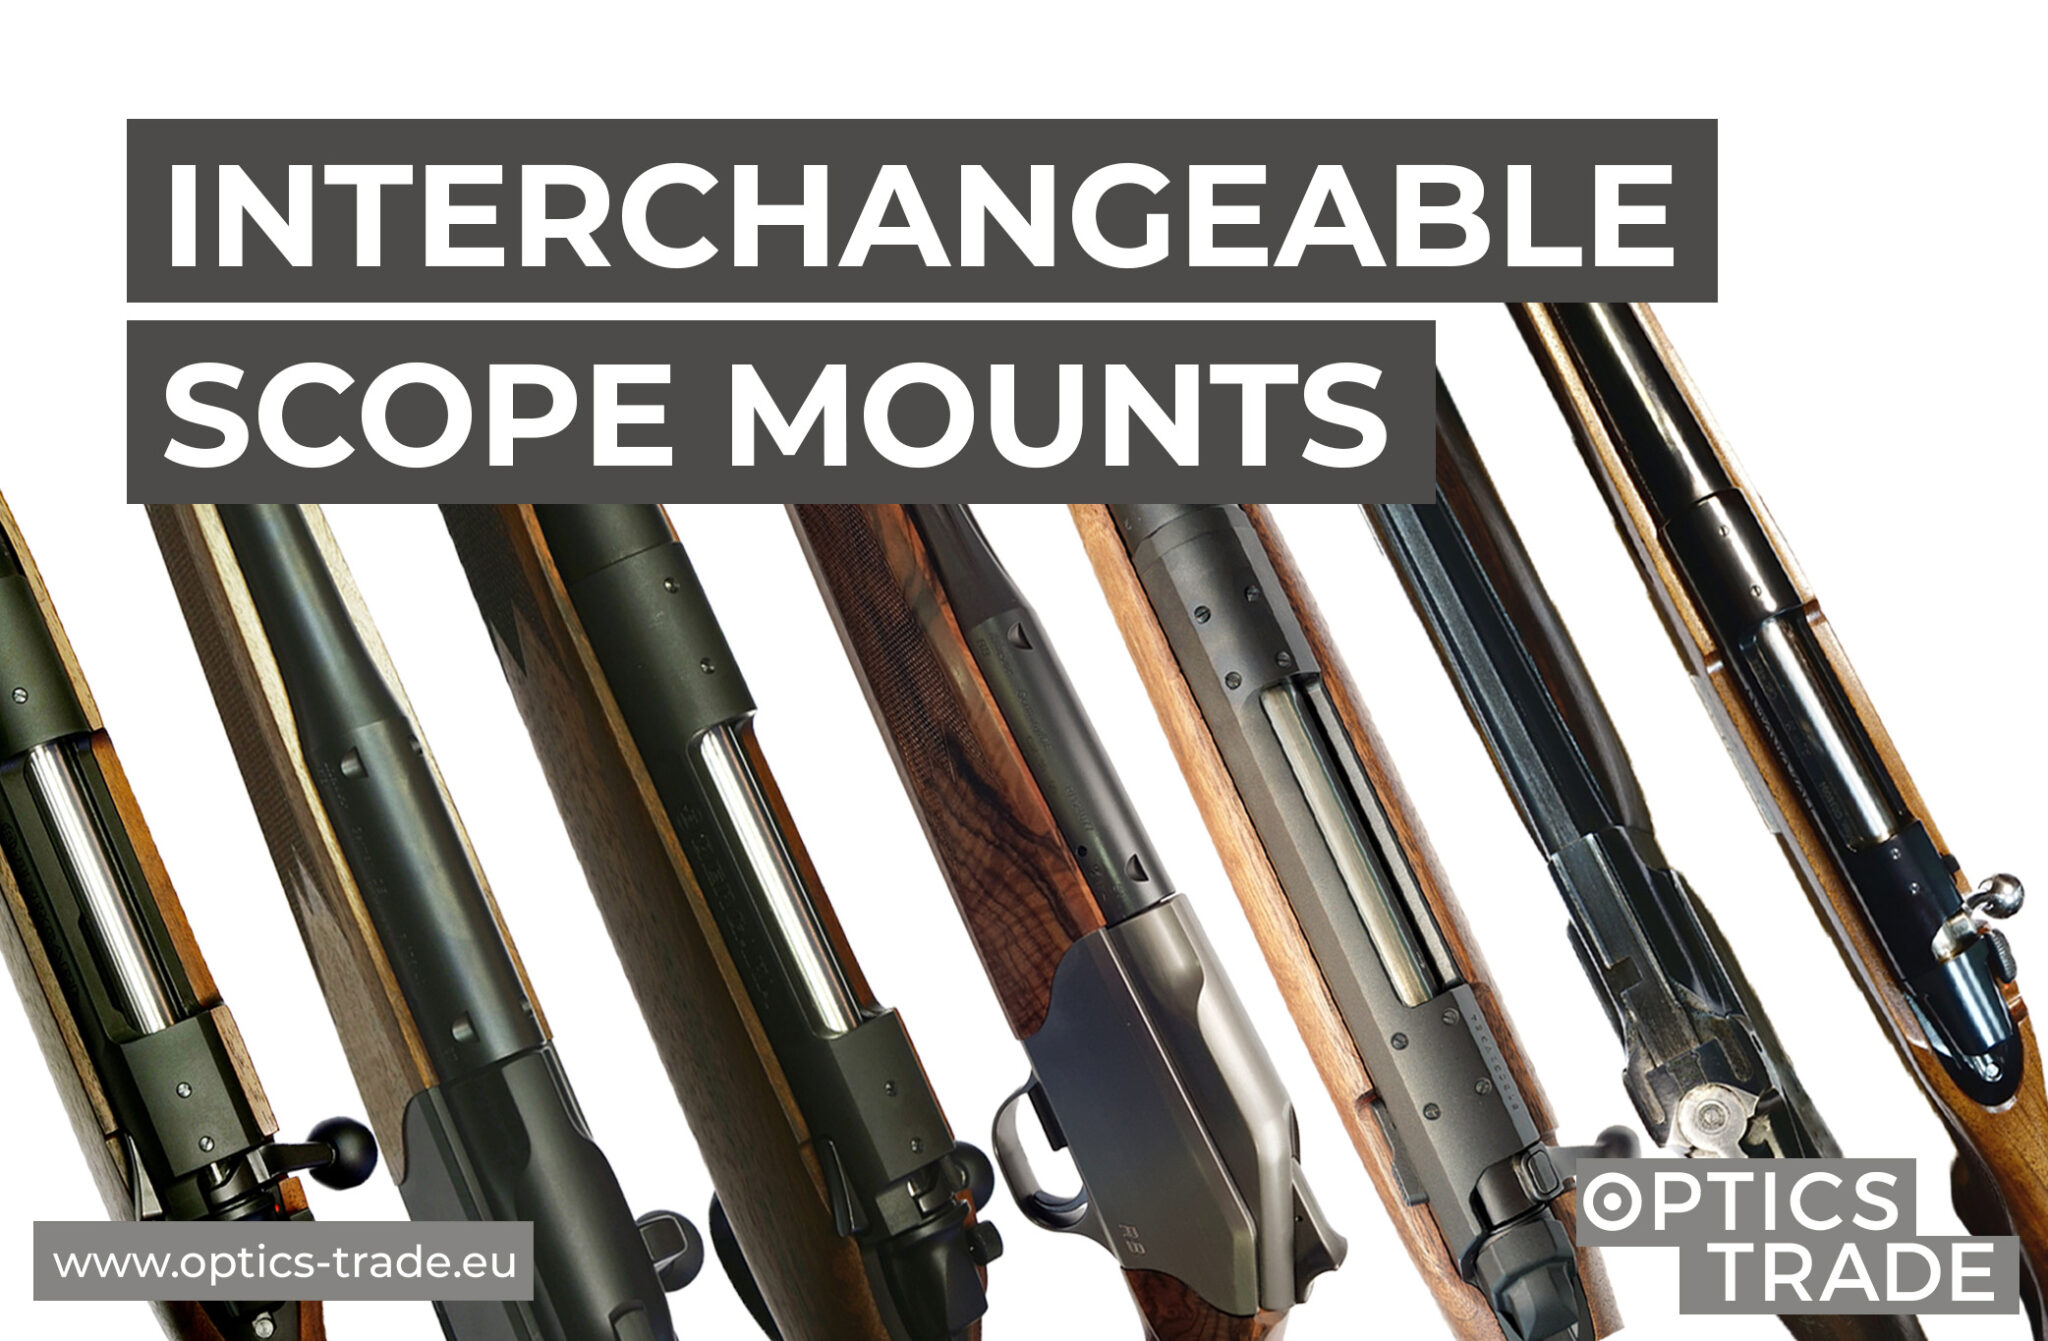 A Complete Guide to Riflescope Mount Interchangeability